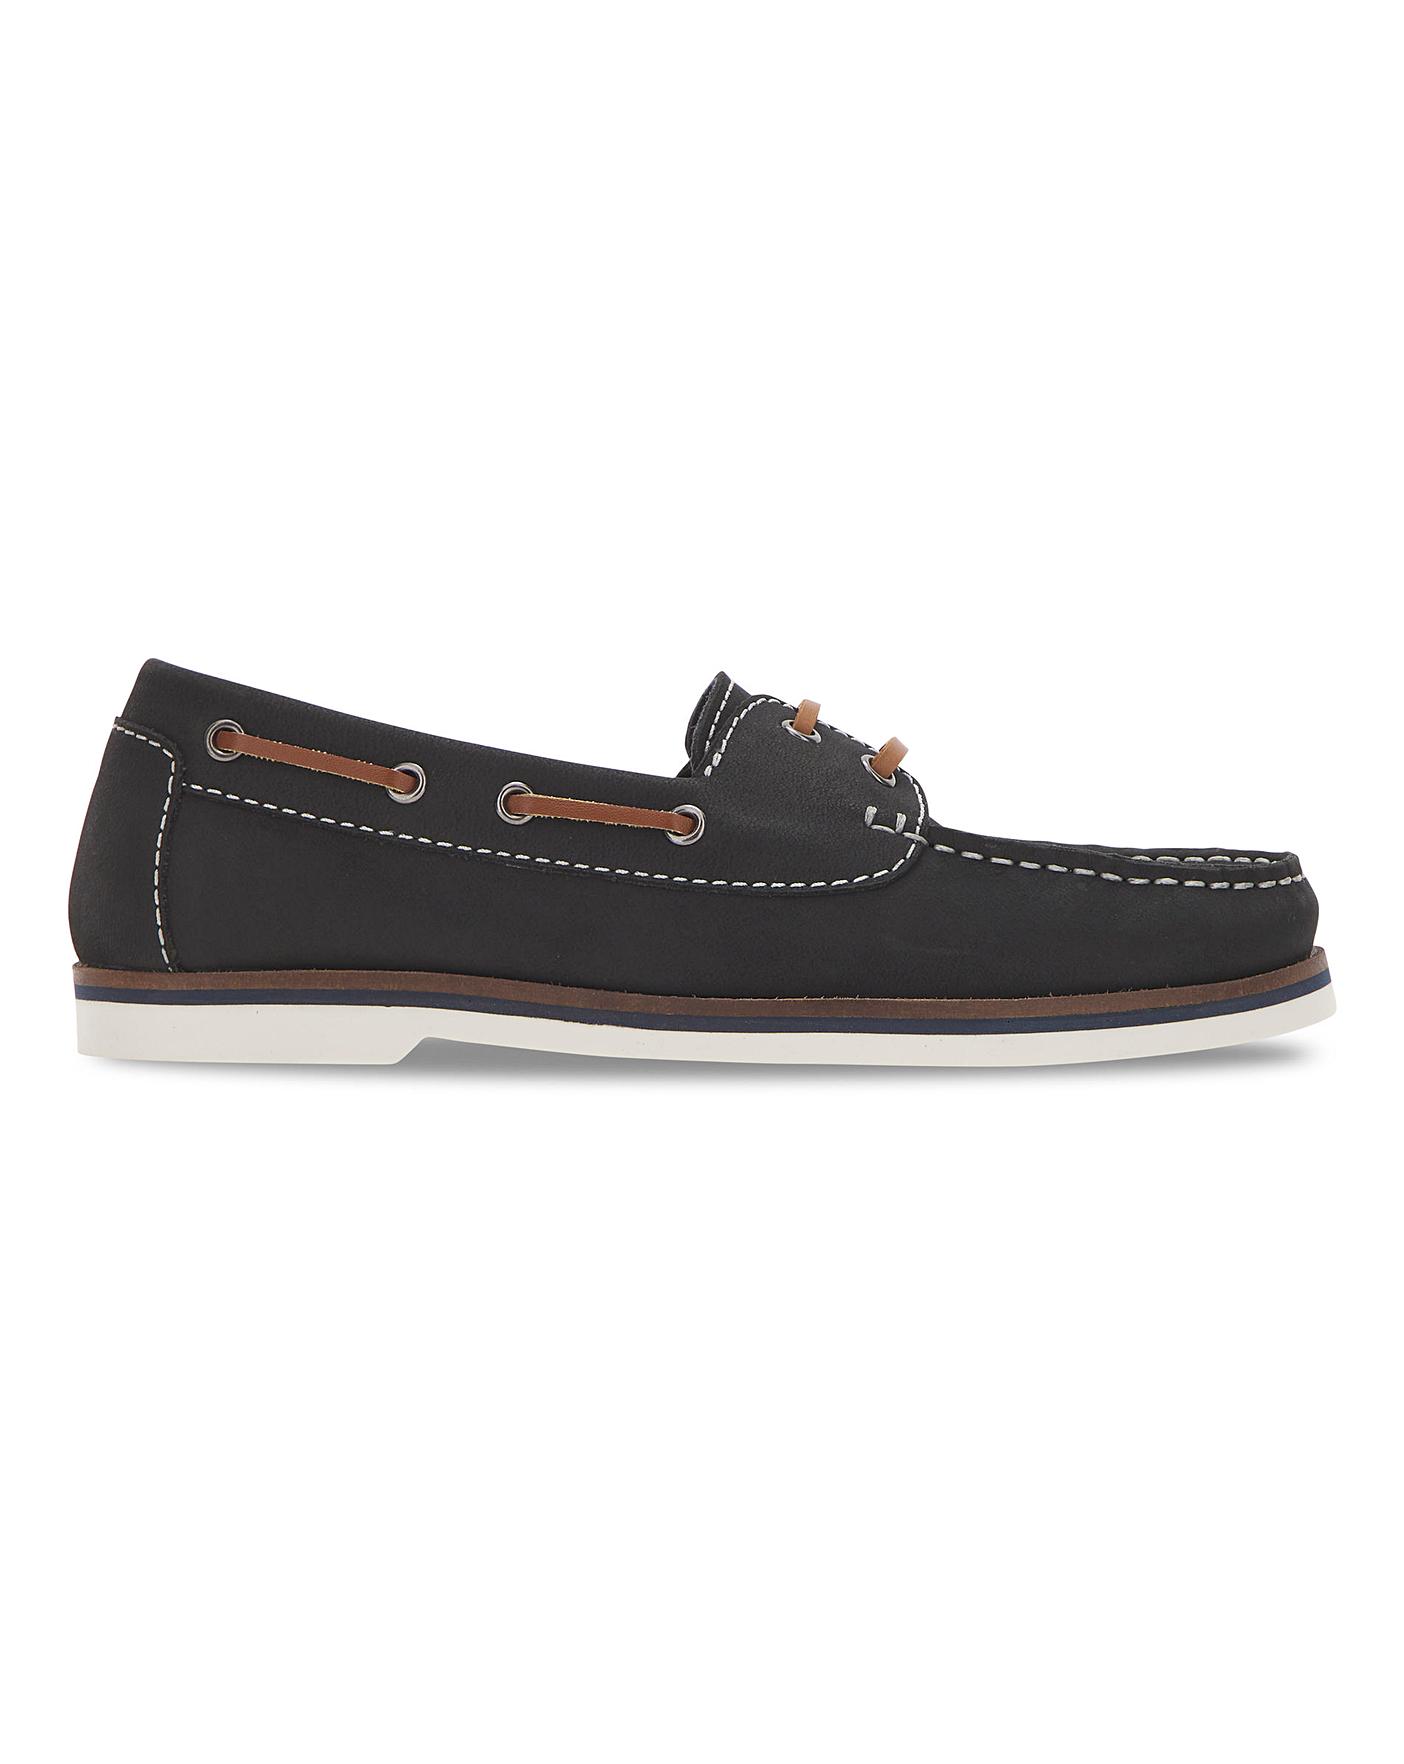 Leather Lace Up Boat Shoes EEE Fit | J D Williams